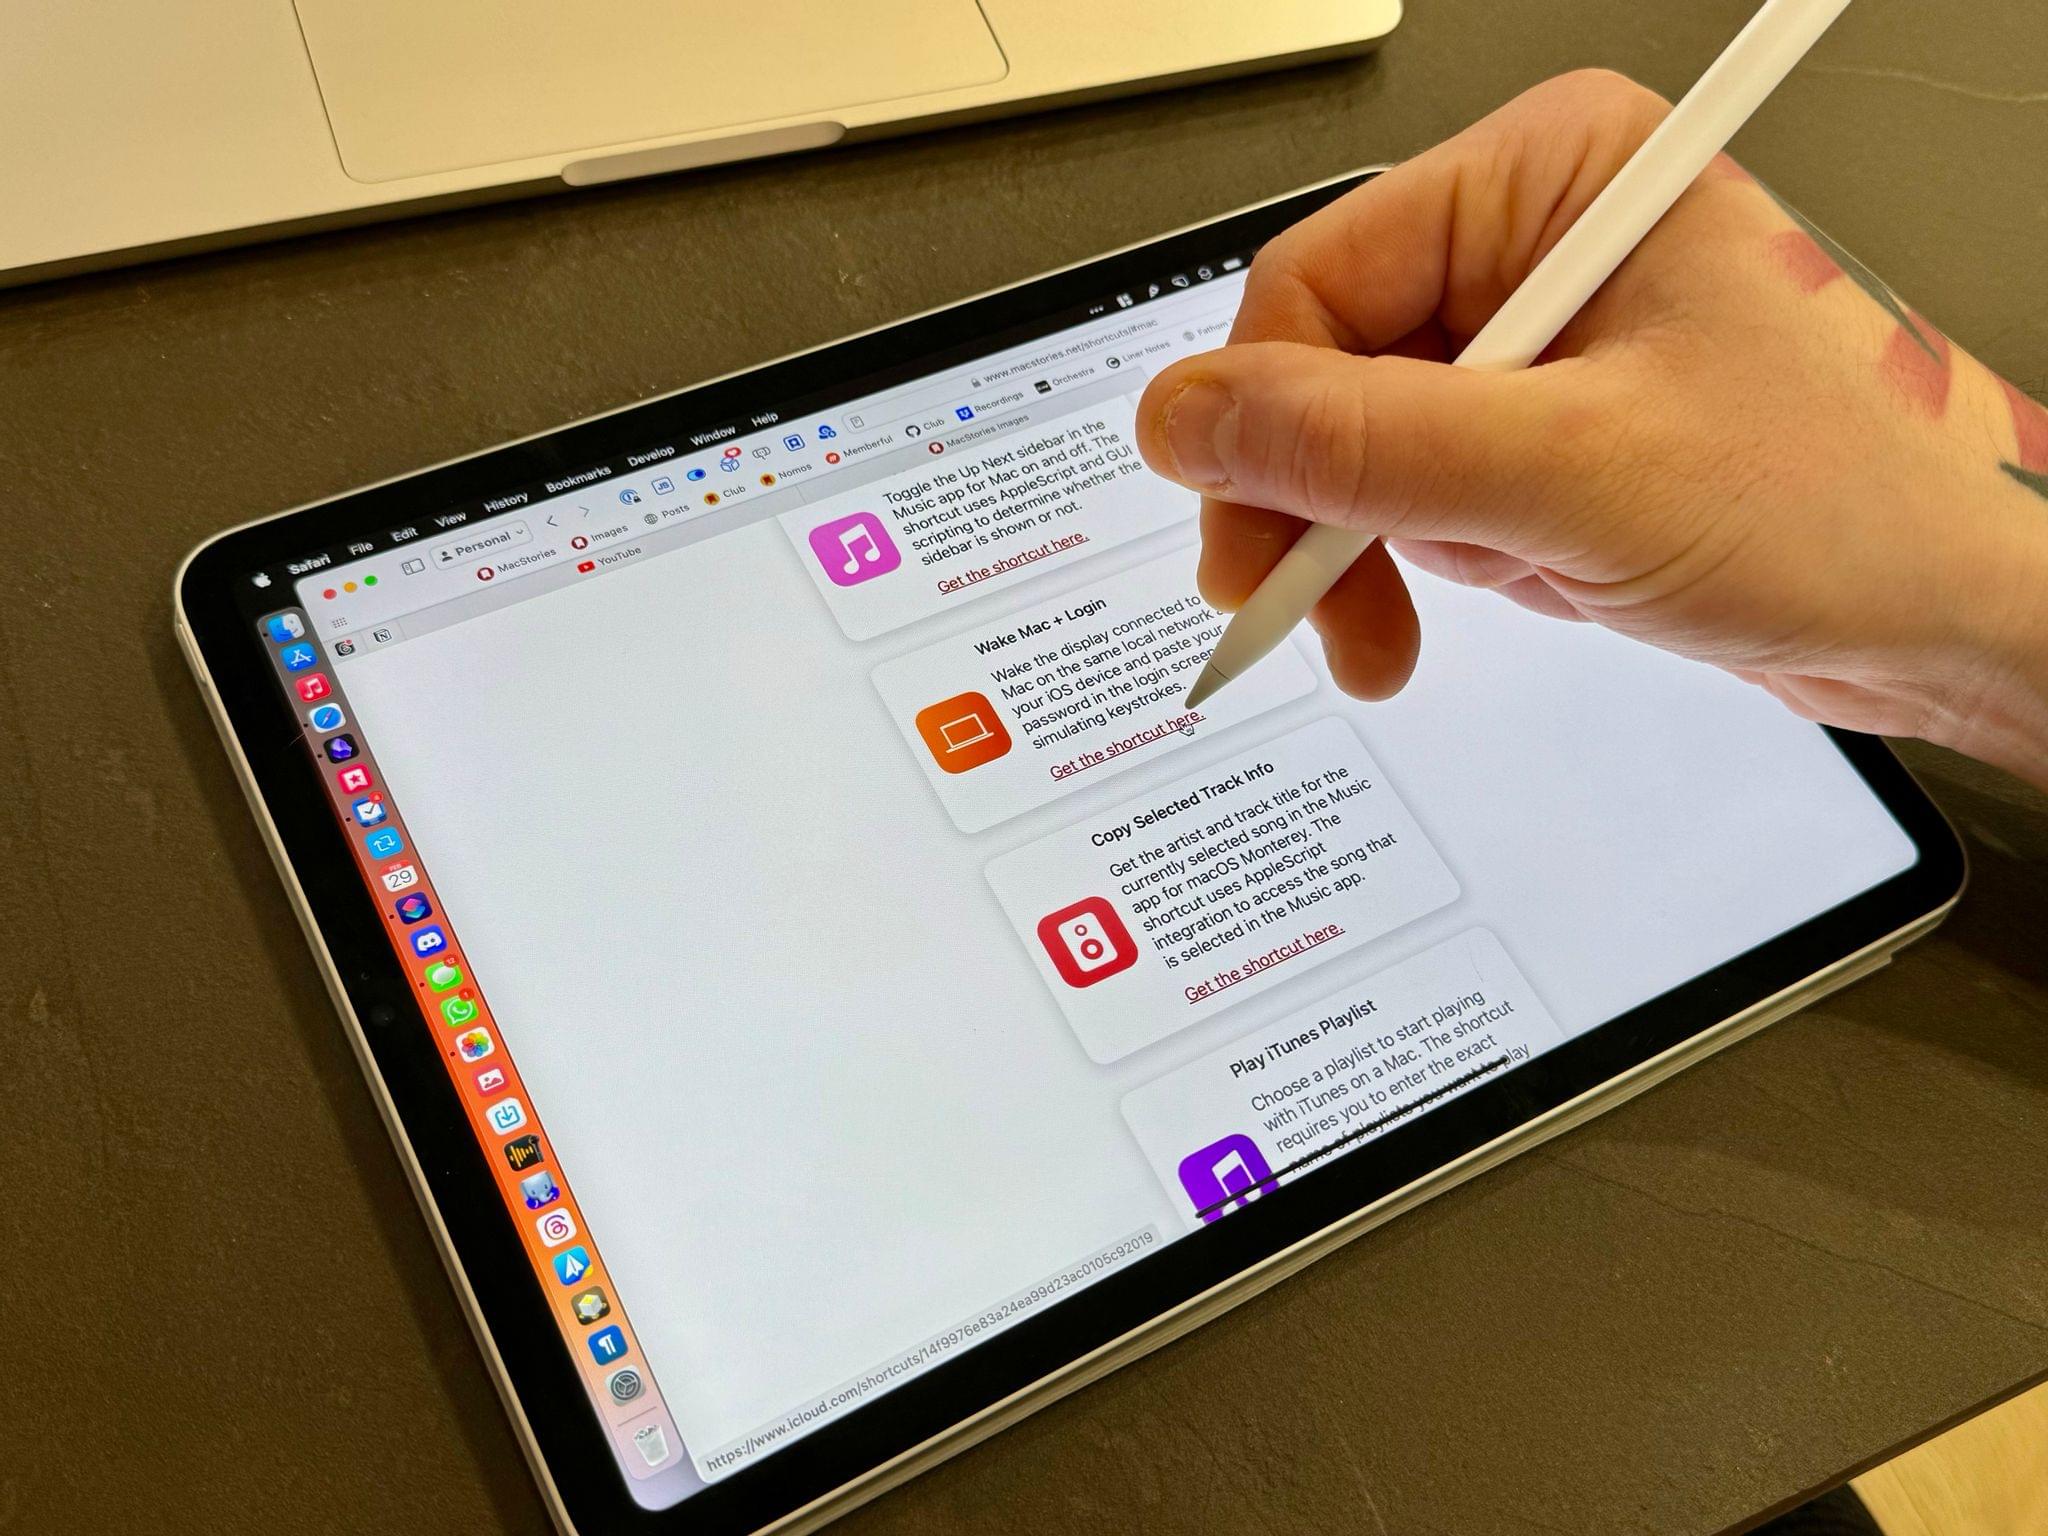 The Apple Pencil can be used to click around the macOS UI and hover over links and other interface elements.